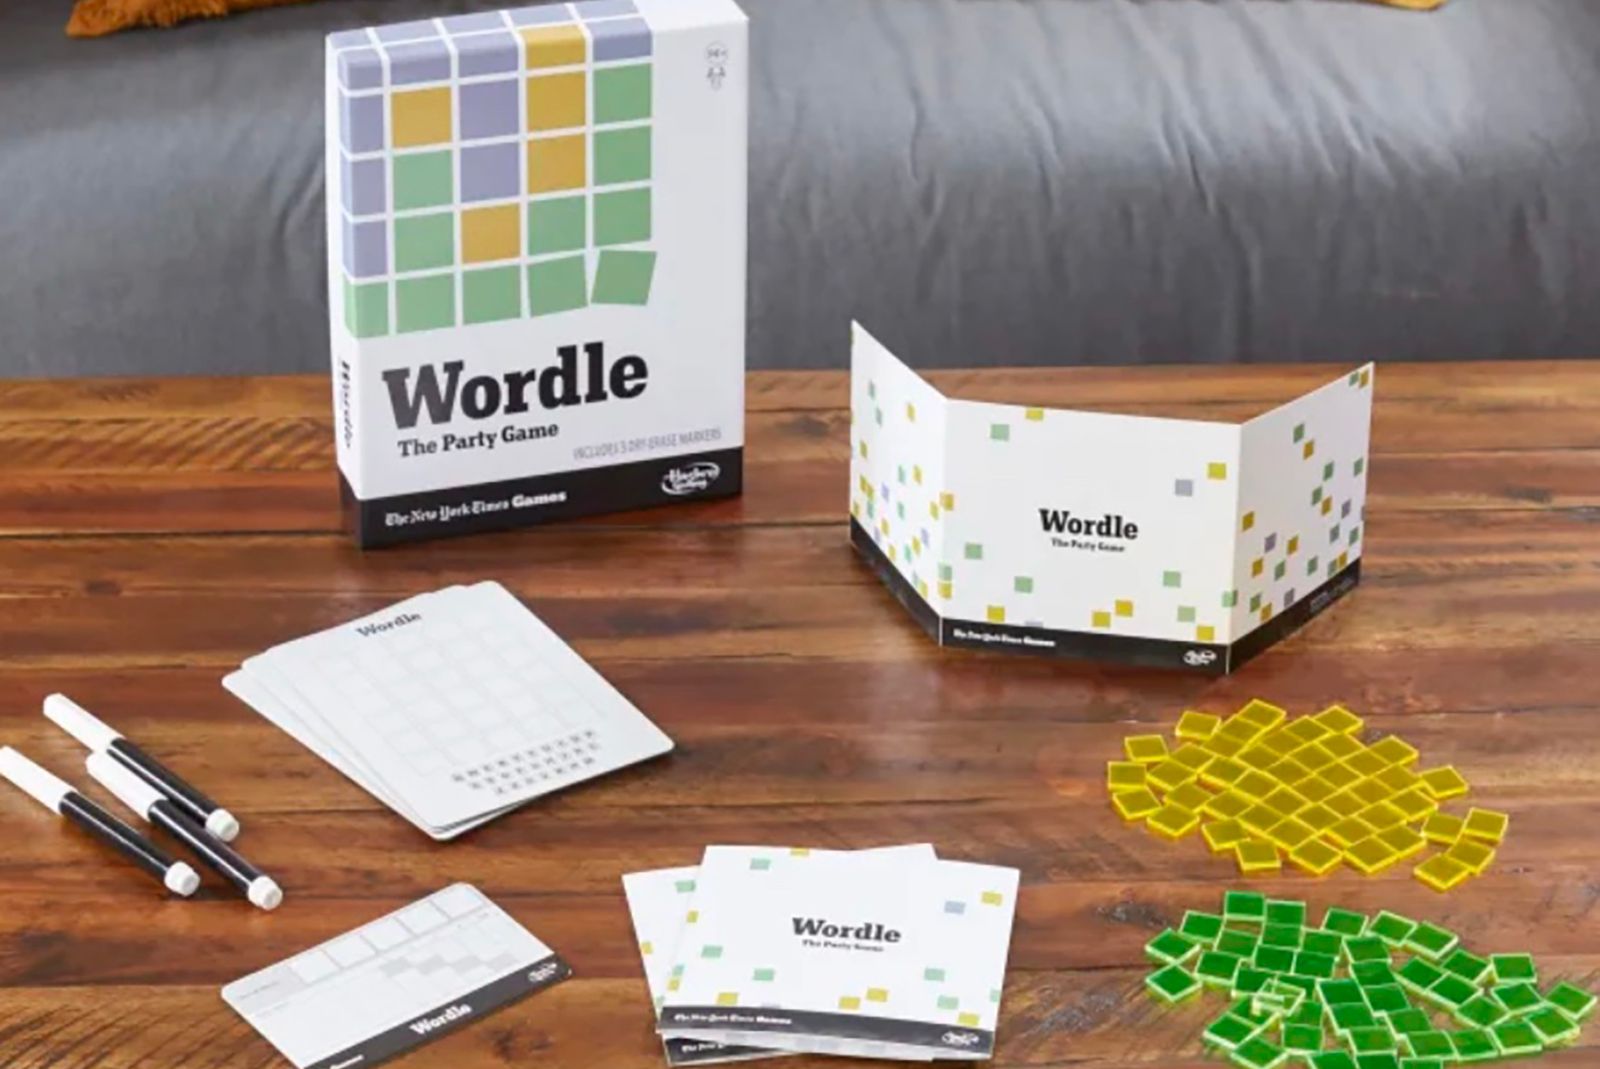 Wordle, the online word puzzle the NYT bought, is now a board game photo 1